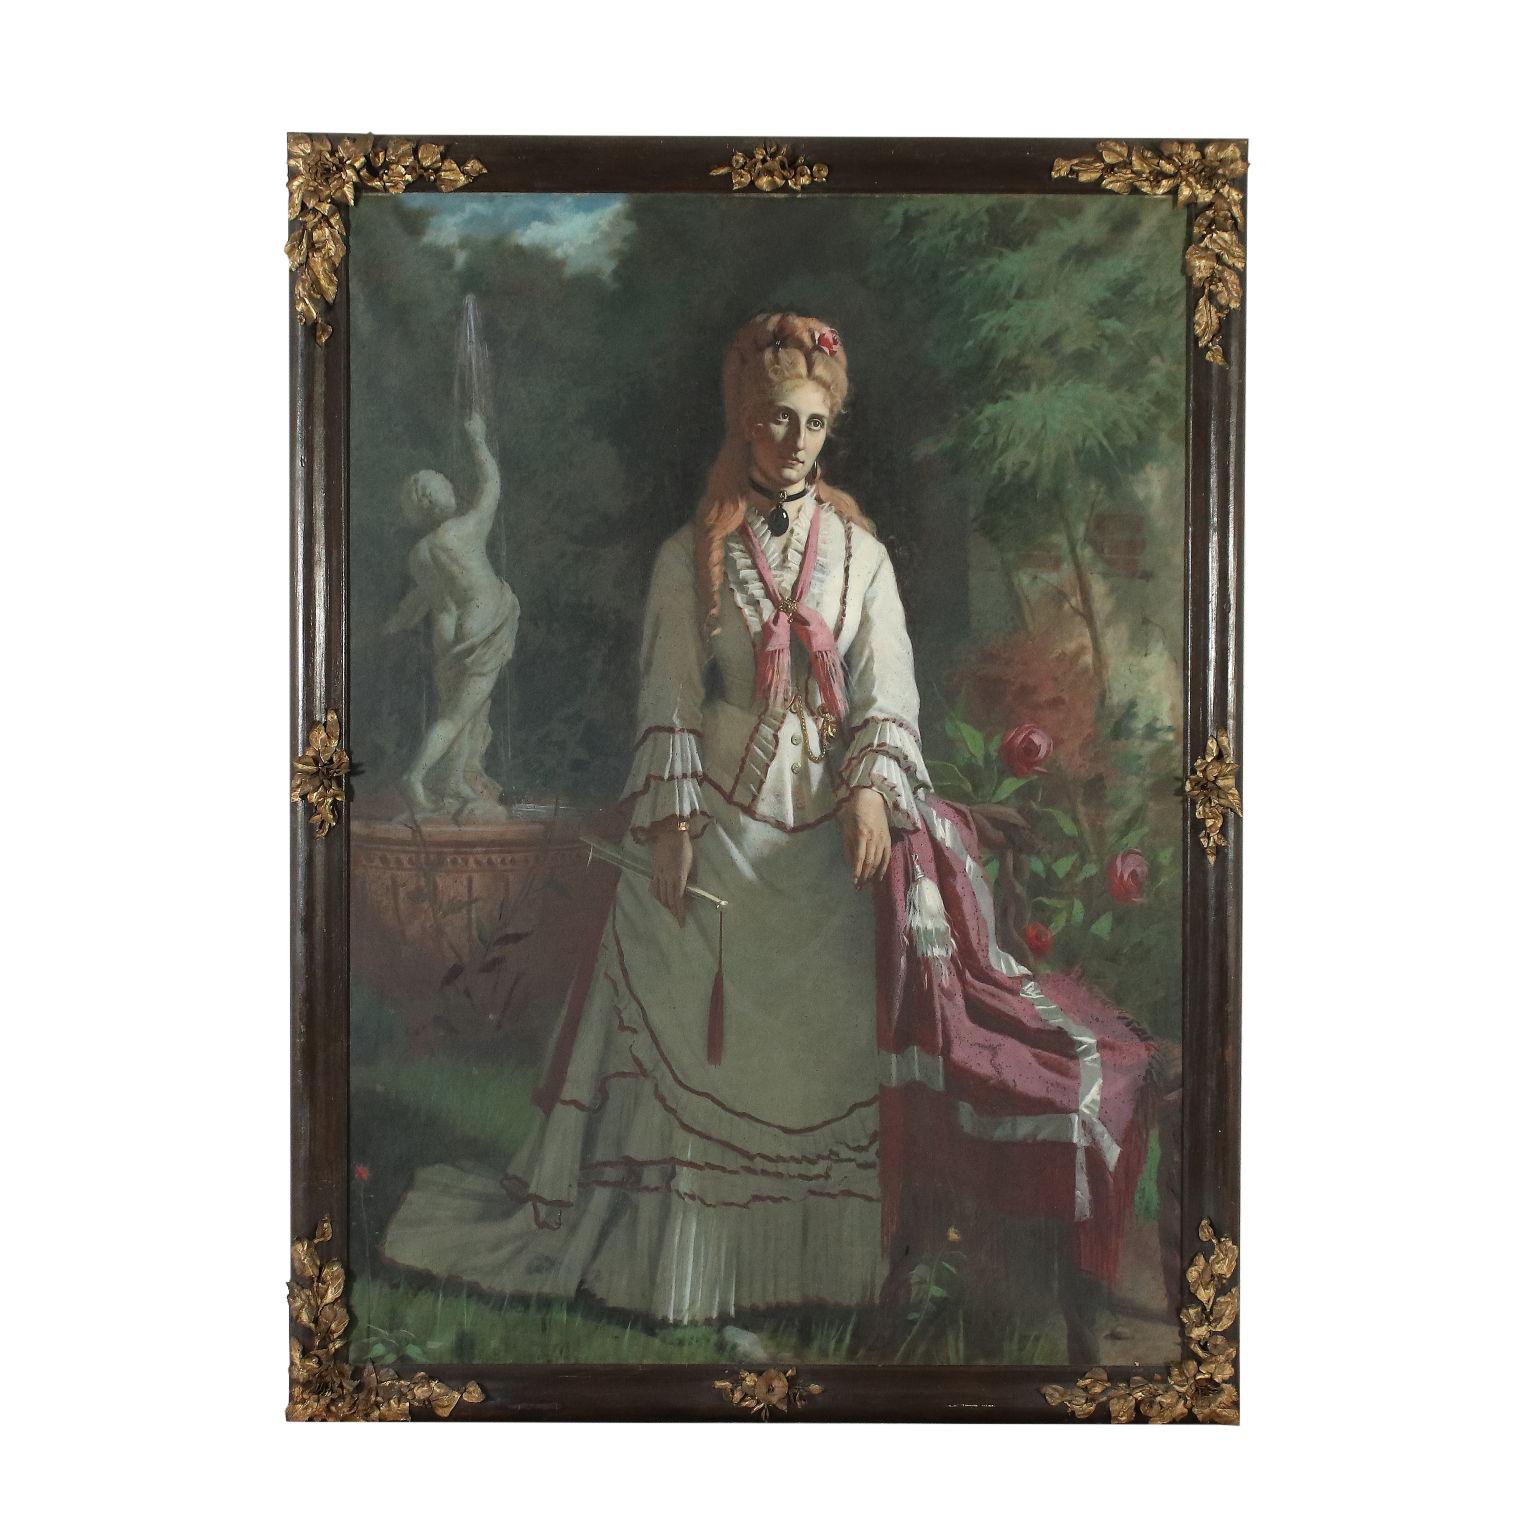 Unknown Portrait Painting - Large Painting Of Noblewoman Oil On Canvas Late '800 Early '900